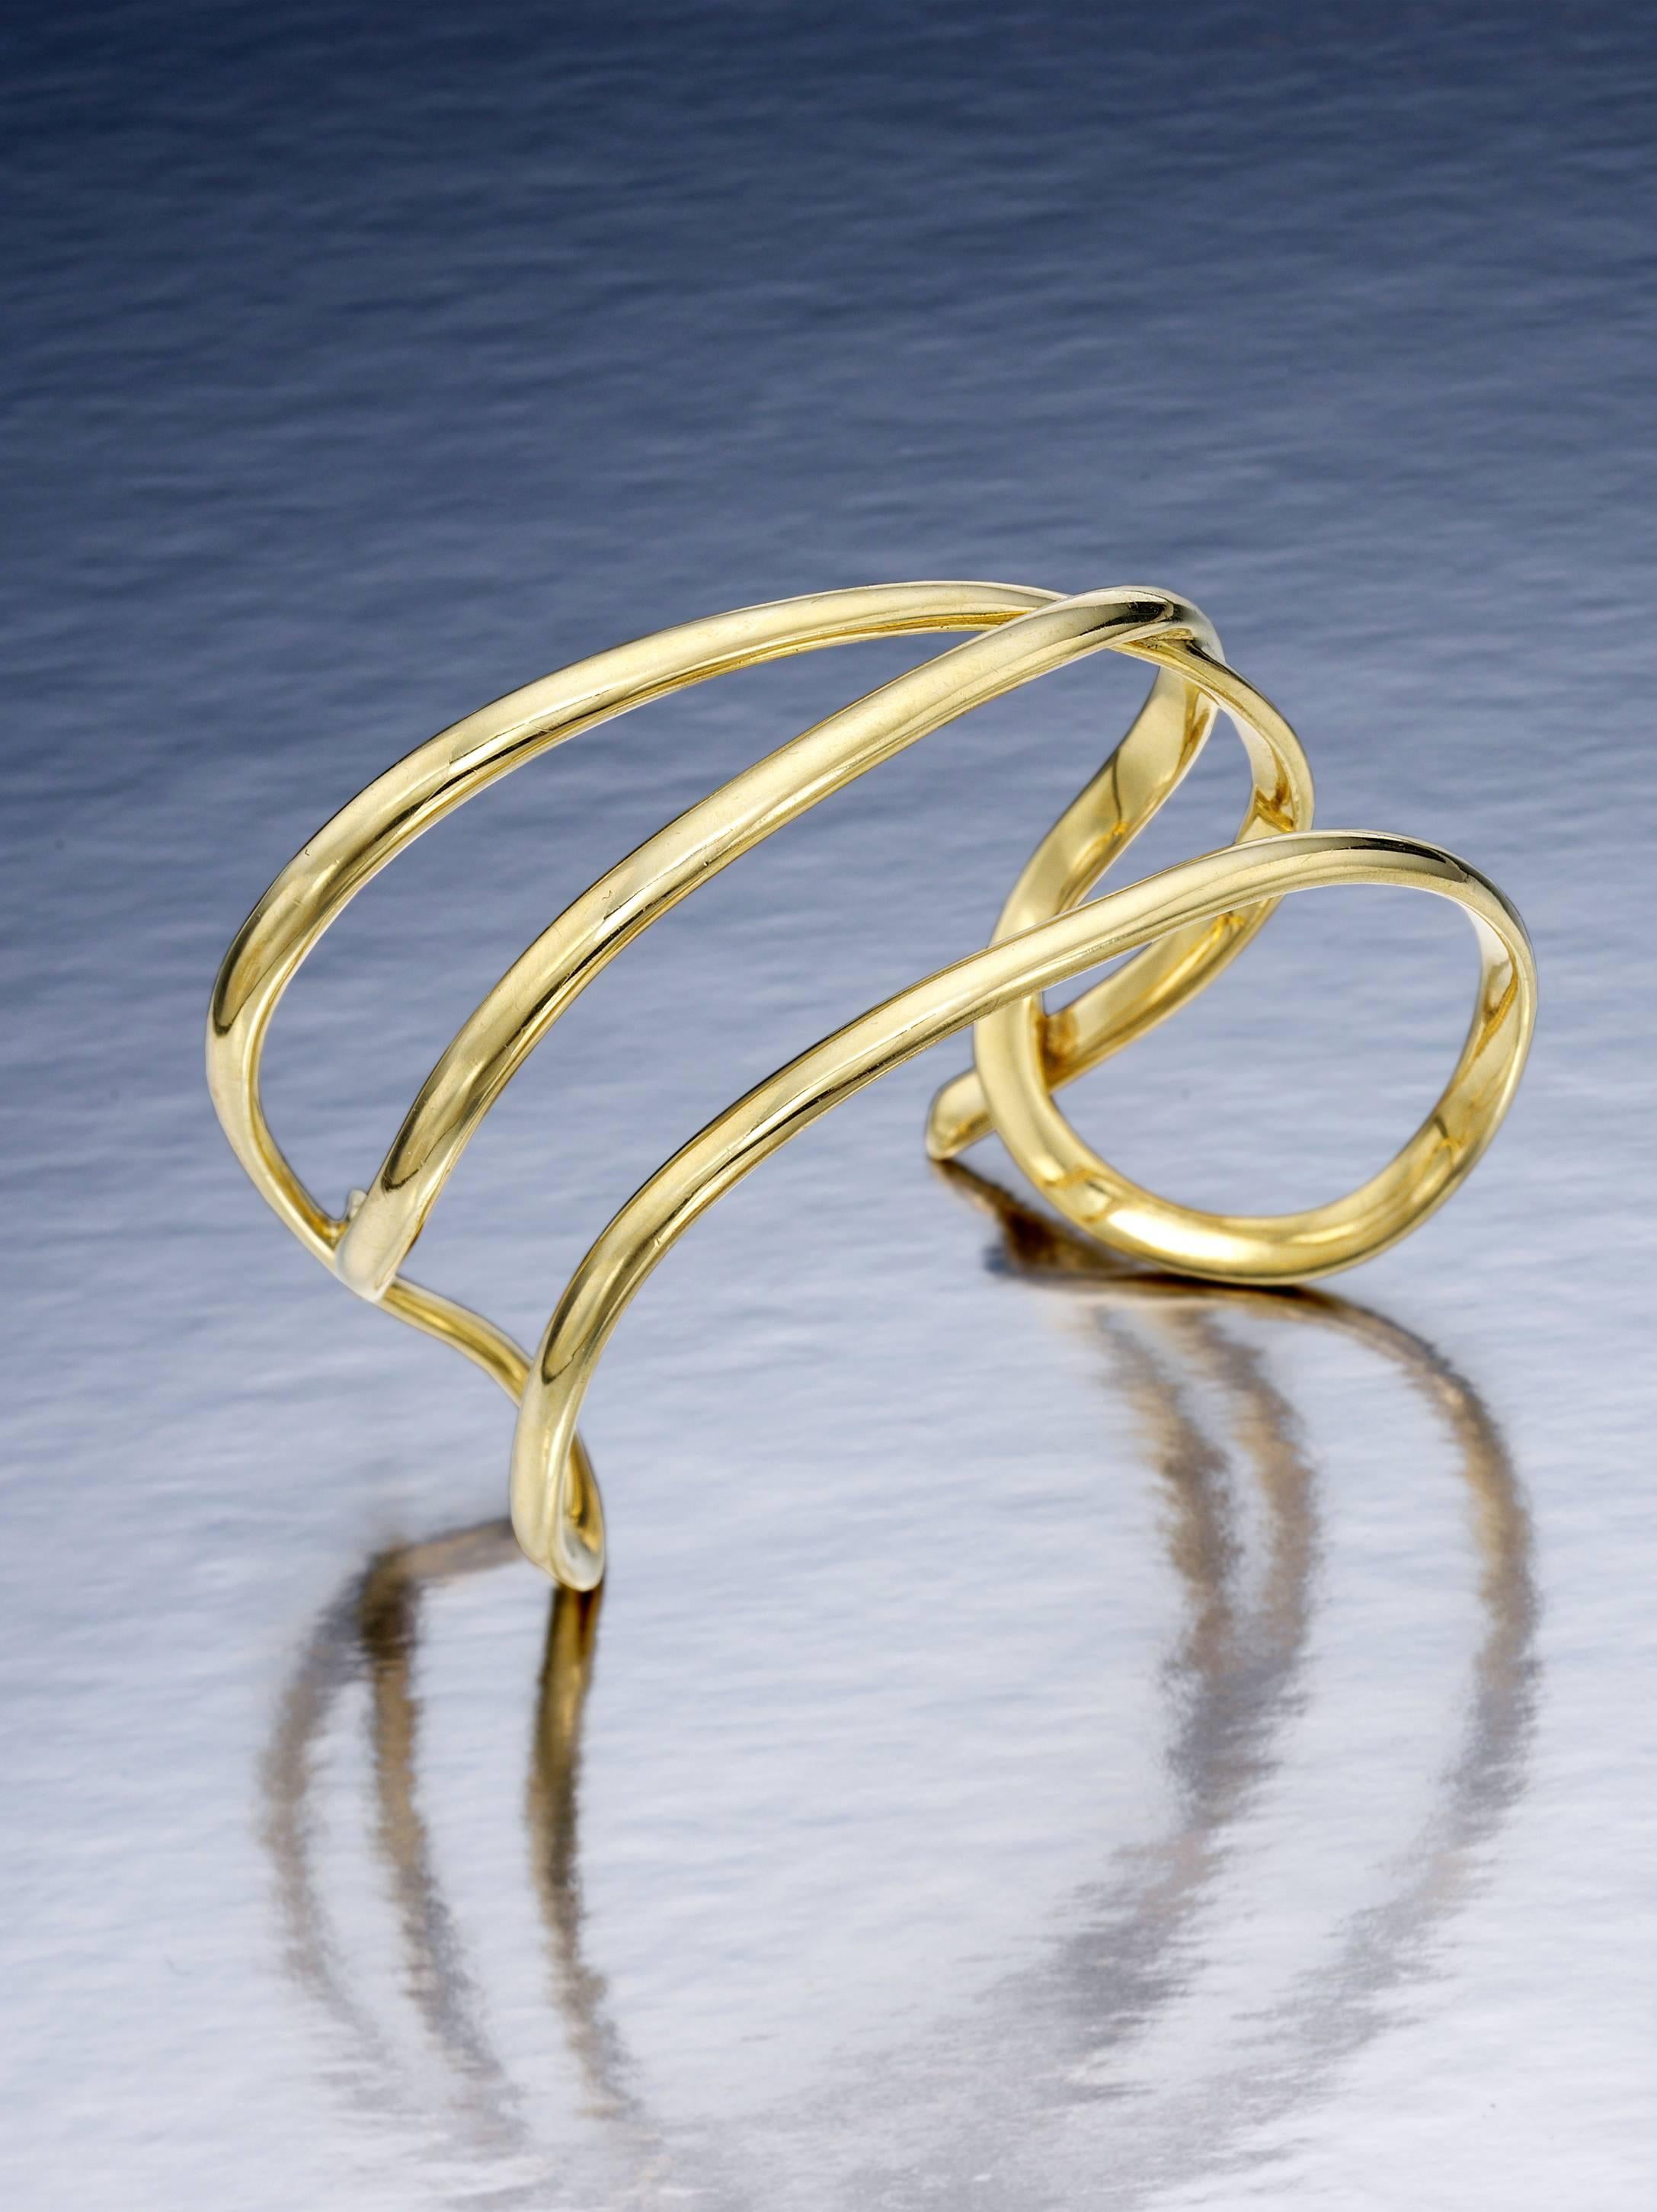 18K polished yellow gold bracelet by Tiffany & Co.  It slips on easily and will fit most wrists.  It is a large size, but it can be fitted to a smaller wrist  It is 1.25 inches wide and 56.4 grams.  